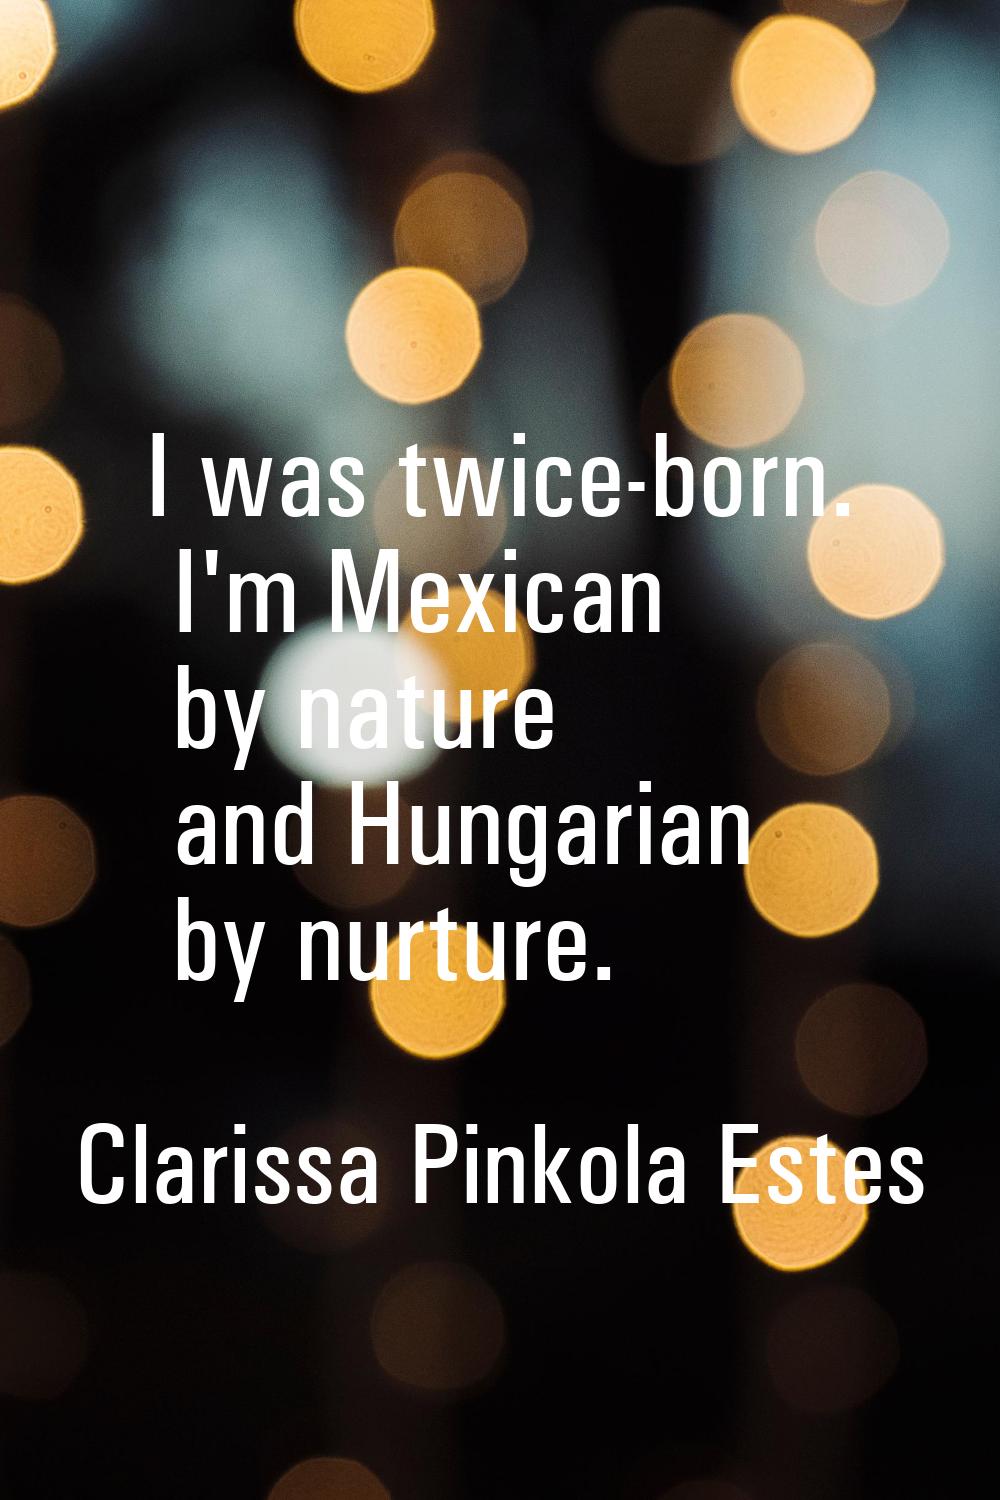 I was twice-born. I'm Mexican by nature and Hungarian by nurture.